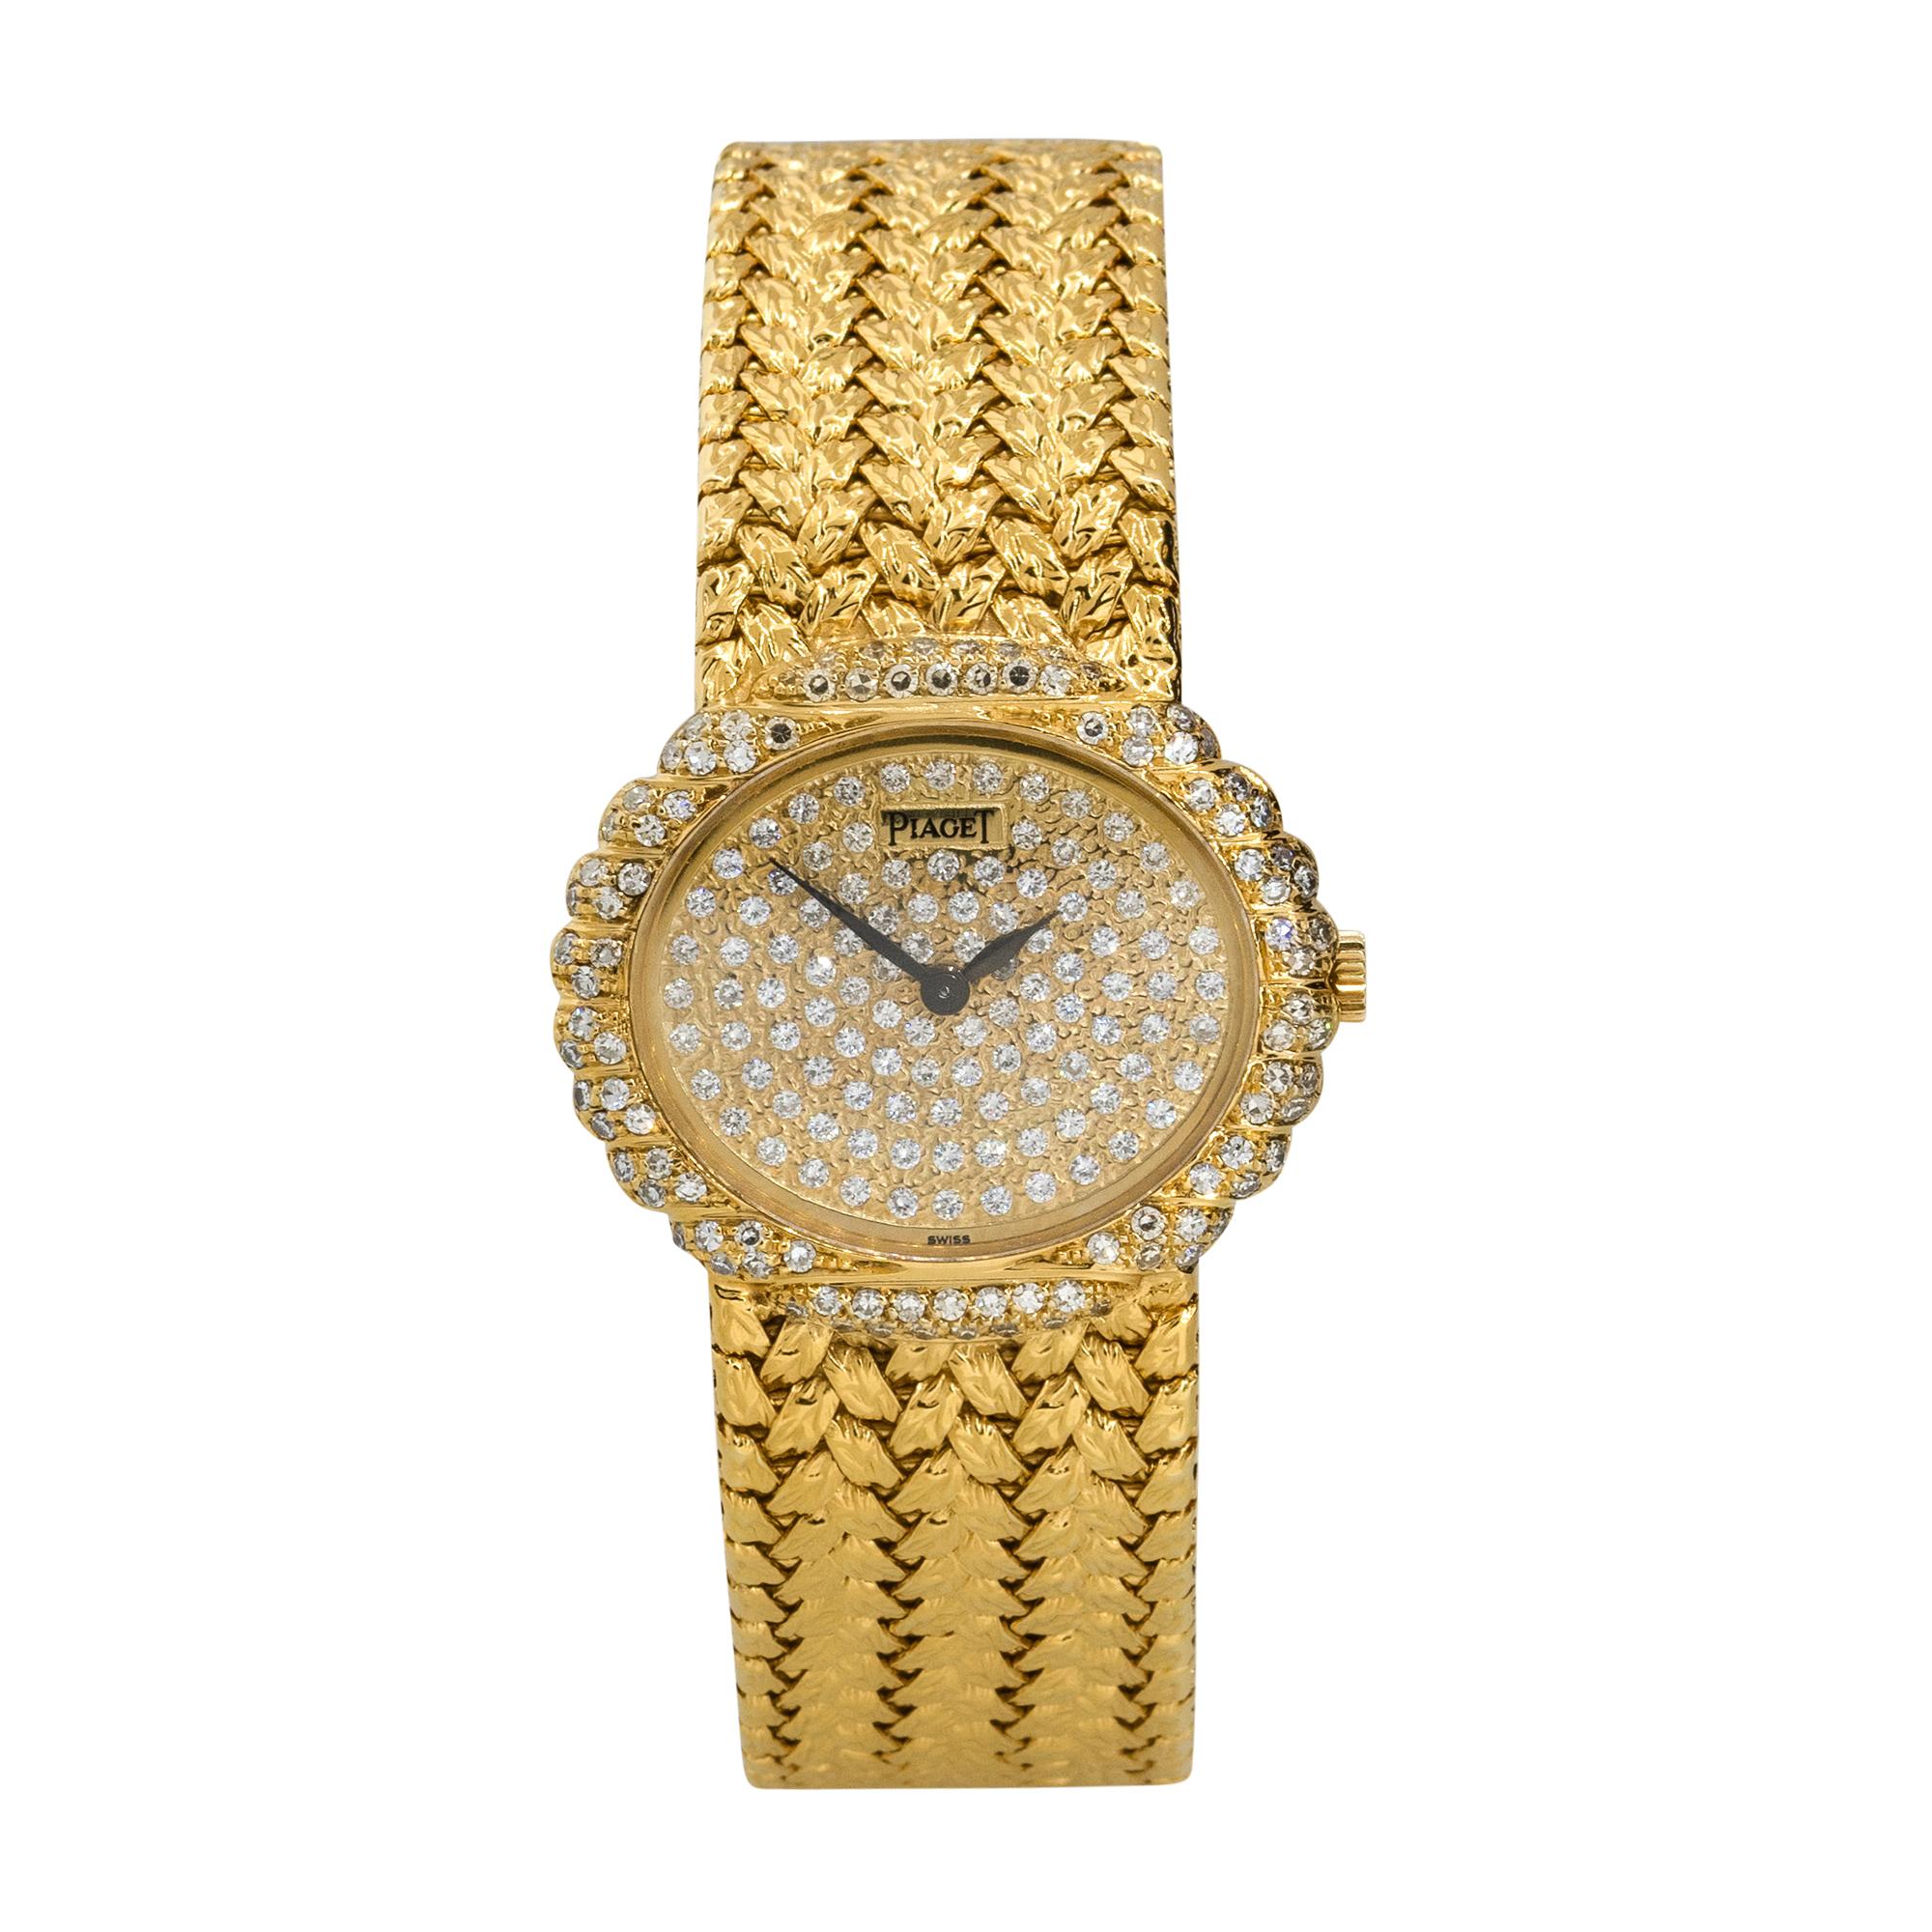 Brand: Piaget
Case Material: 18k Yellow Gold
Case Diameter: 27mm
Crystal: Sapphire Crystal
Bezel: 18k Yellow Gold Diamond bezel
Dial: Yellow gold Diamond pave dial
Bracelet: 18k Yellow Gold bracelet
Size: Will fit a 5.5